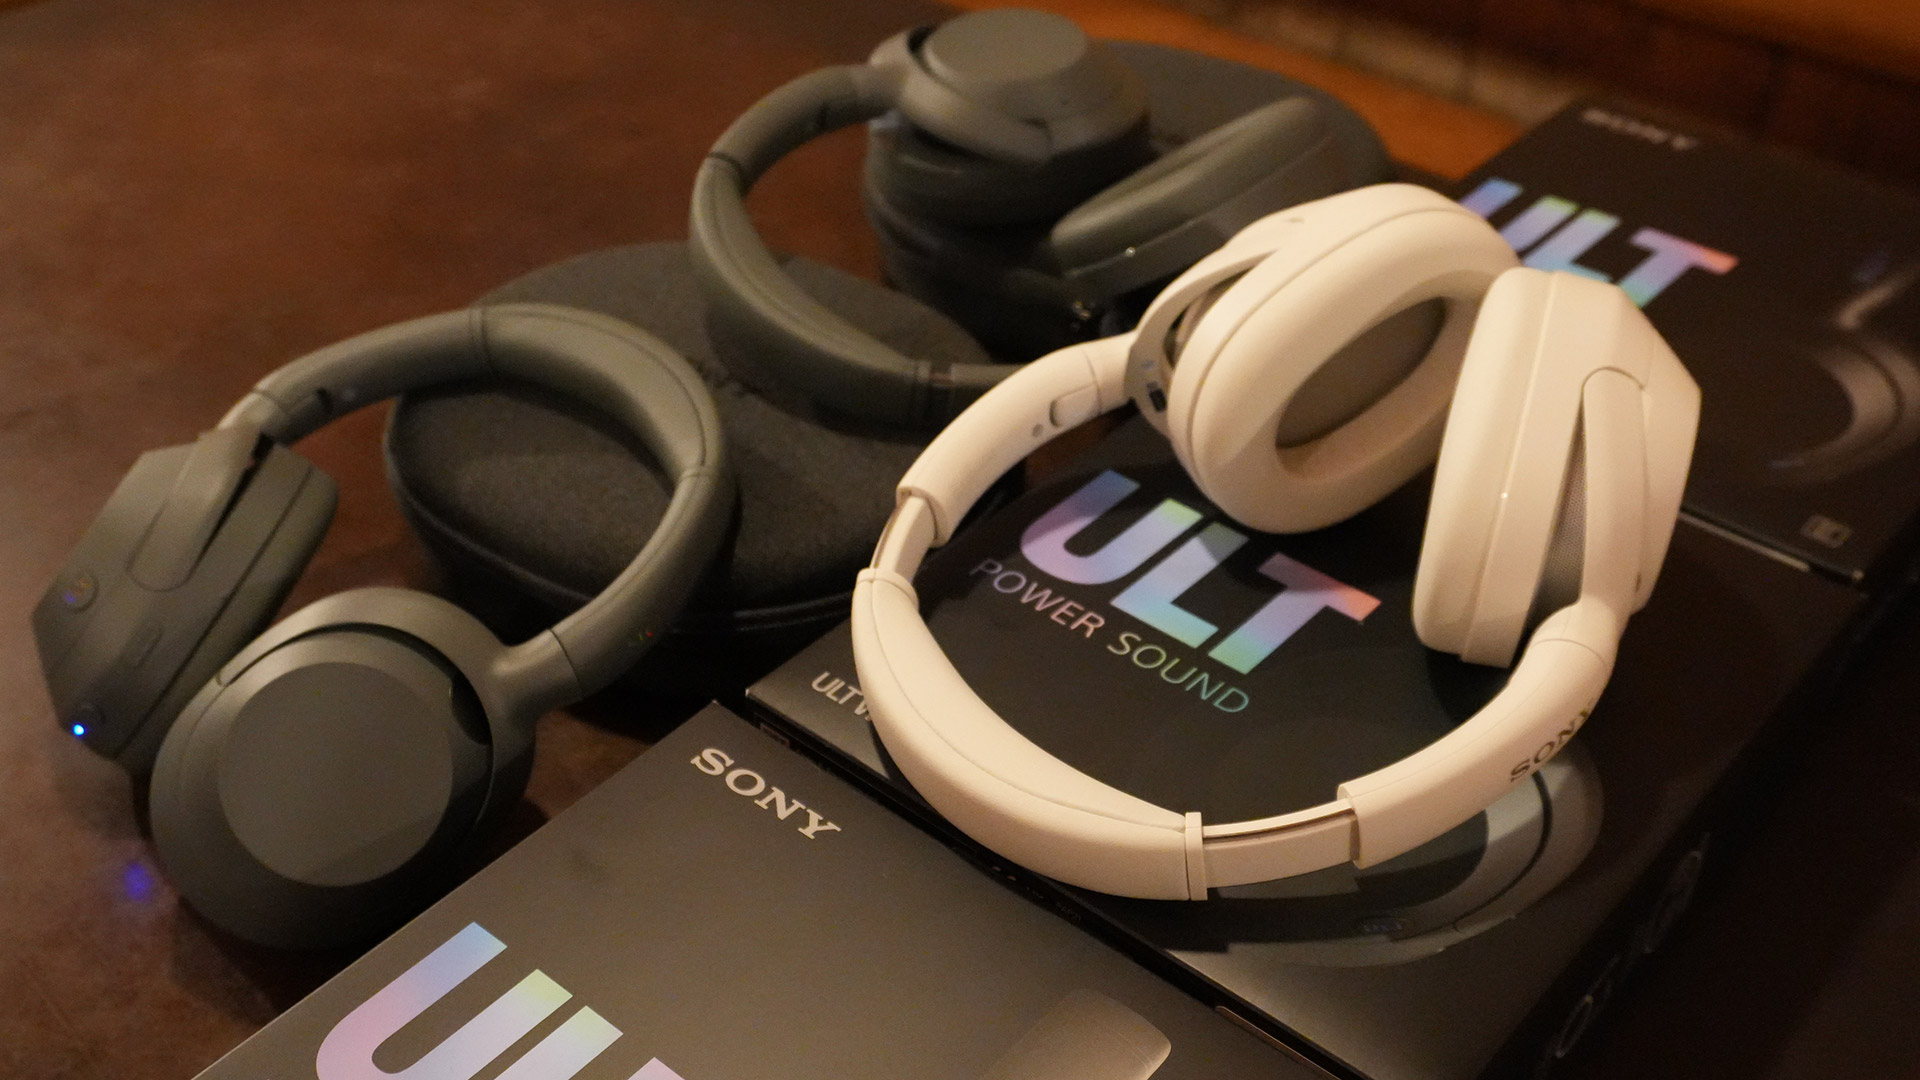 I listened to Sony’s new bassy Ult Wear headphones and was blown away by their unique sound